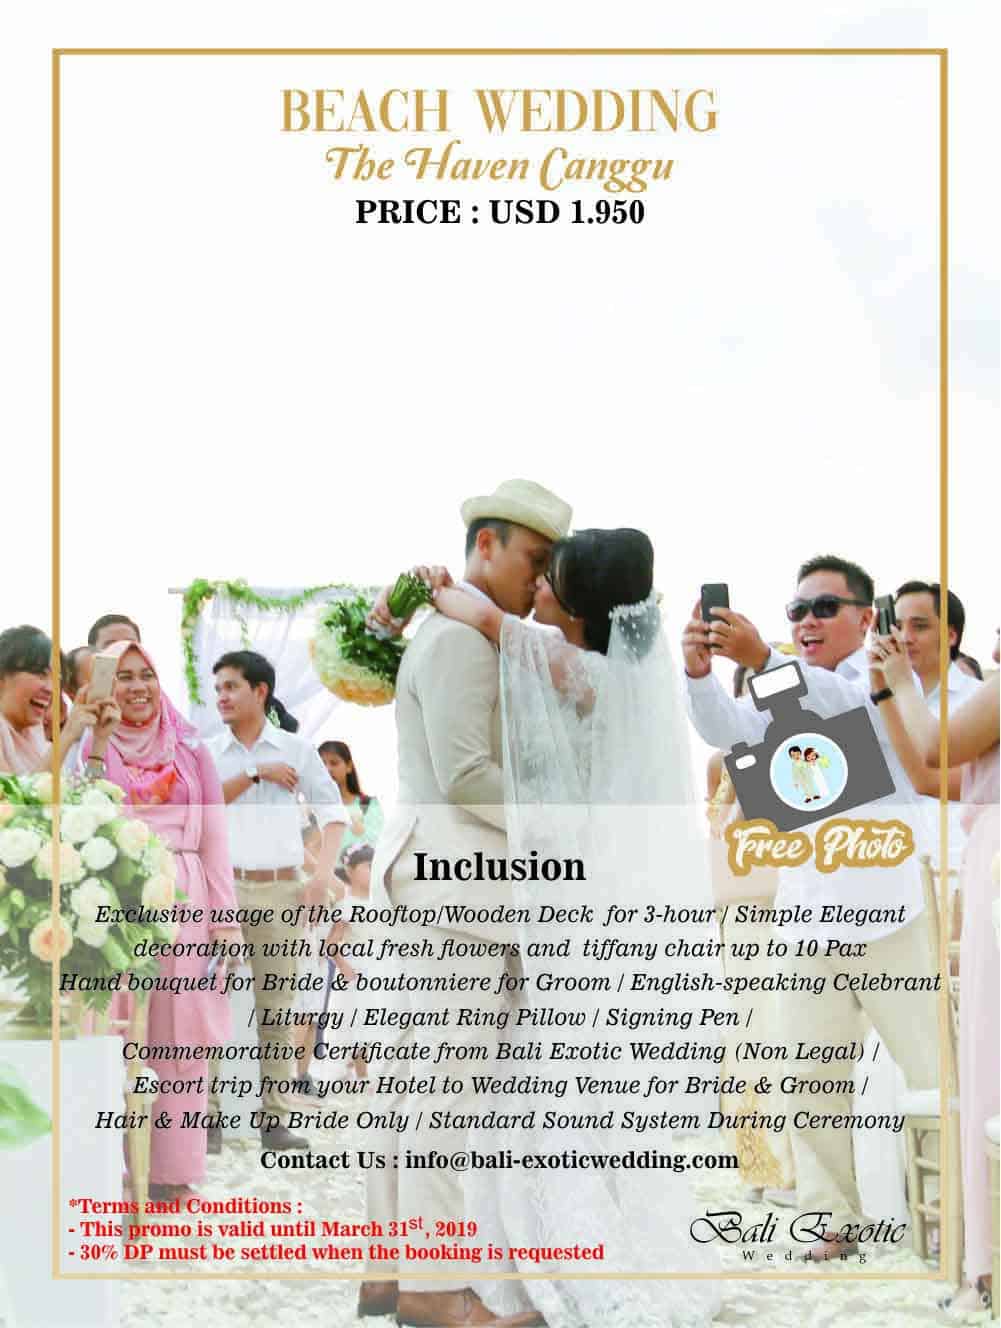 The Haven Canggu Wedding Package